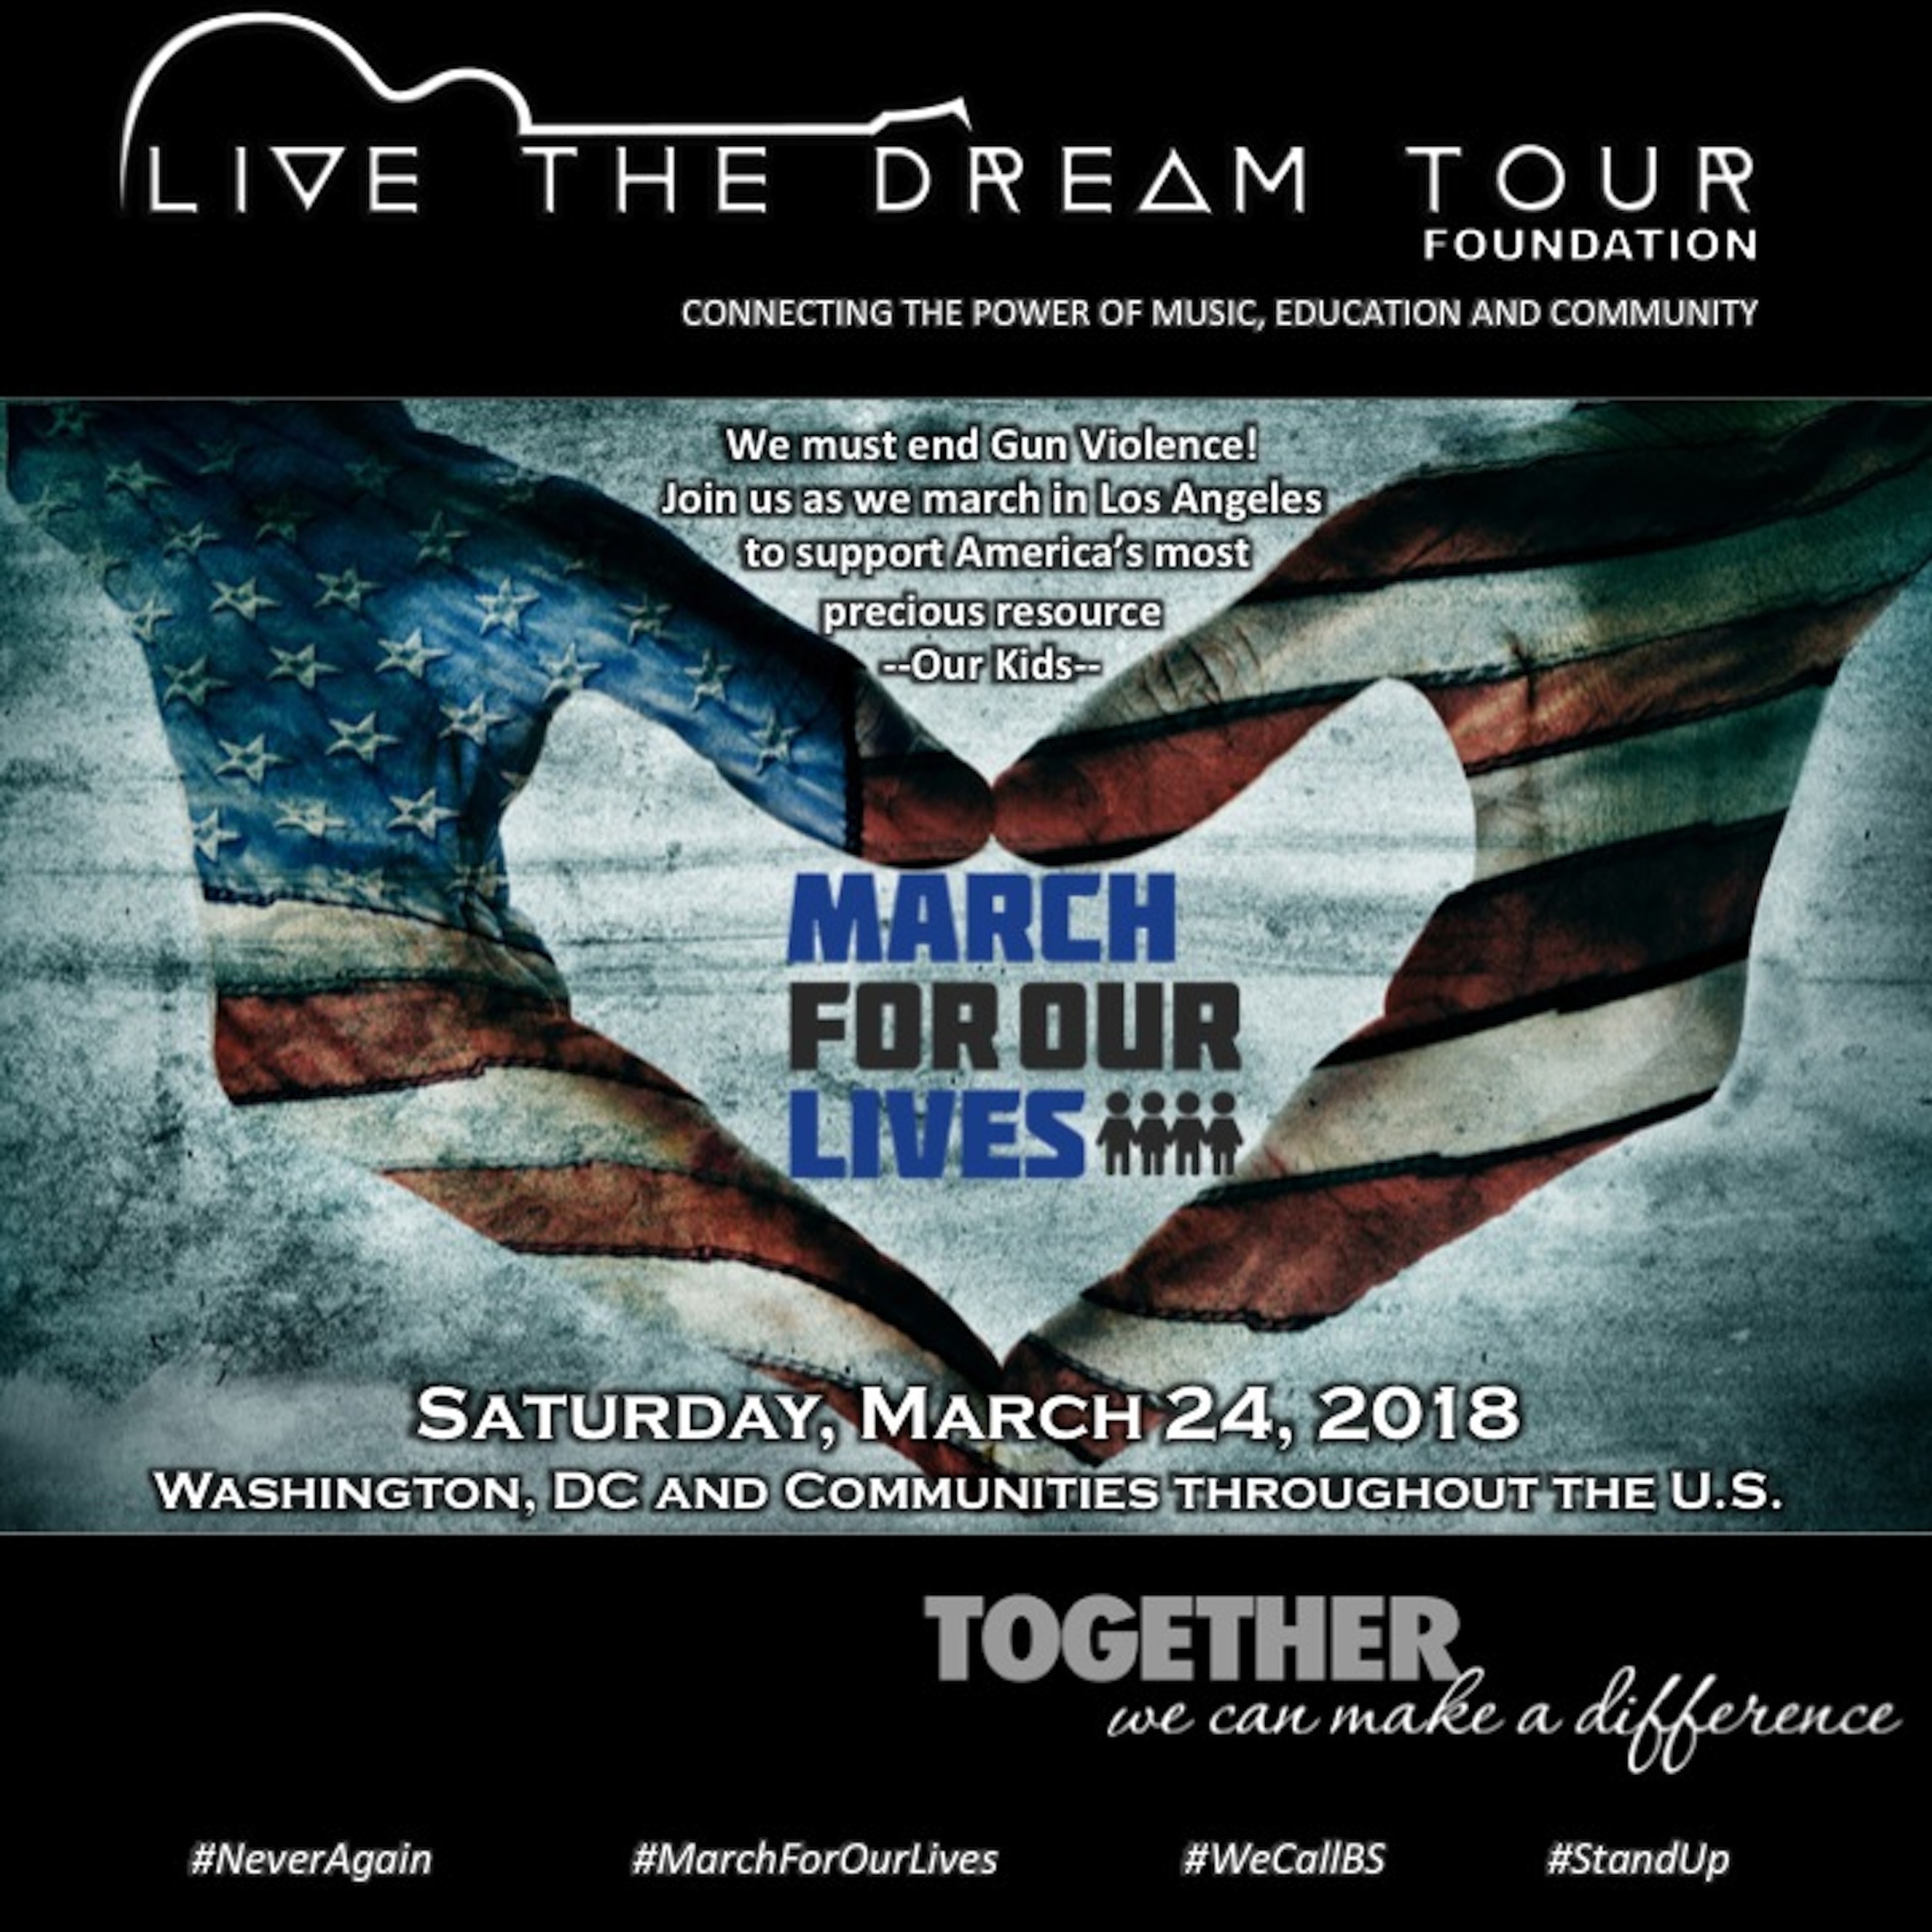 March For Our Lives LTDTF Site